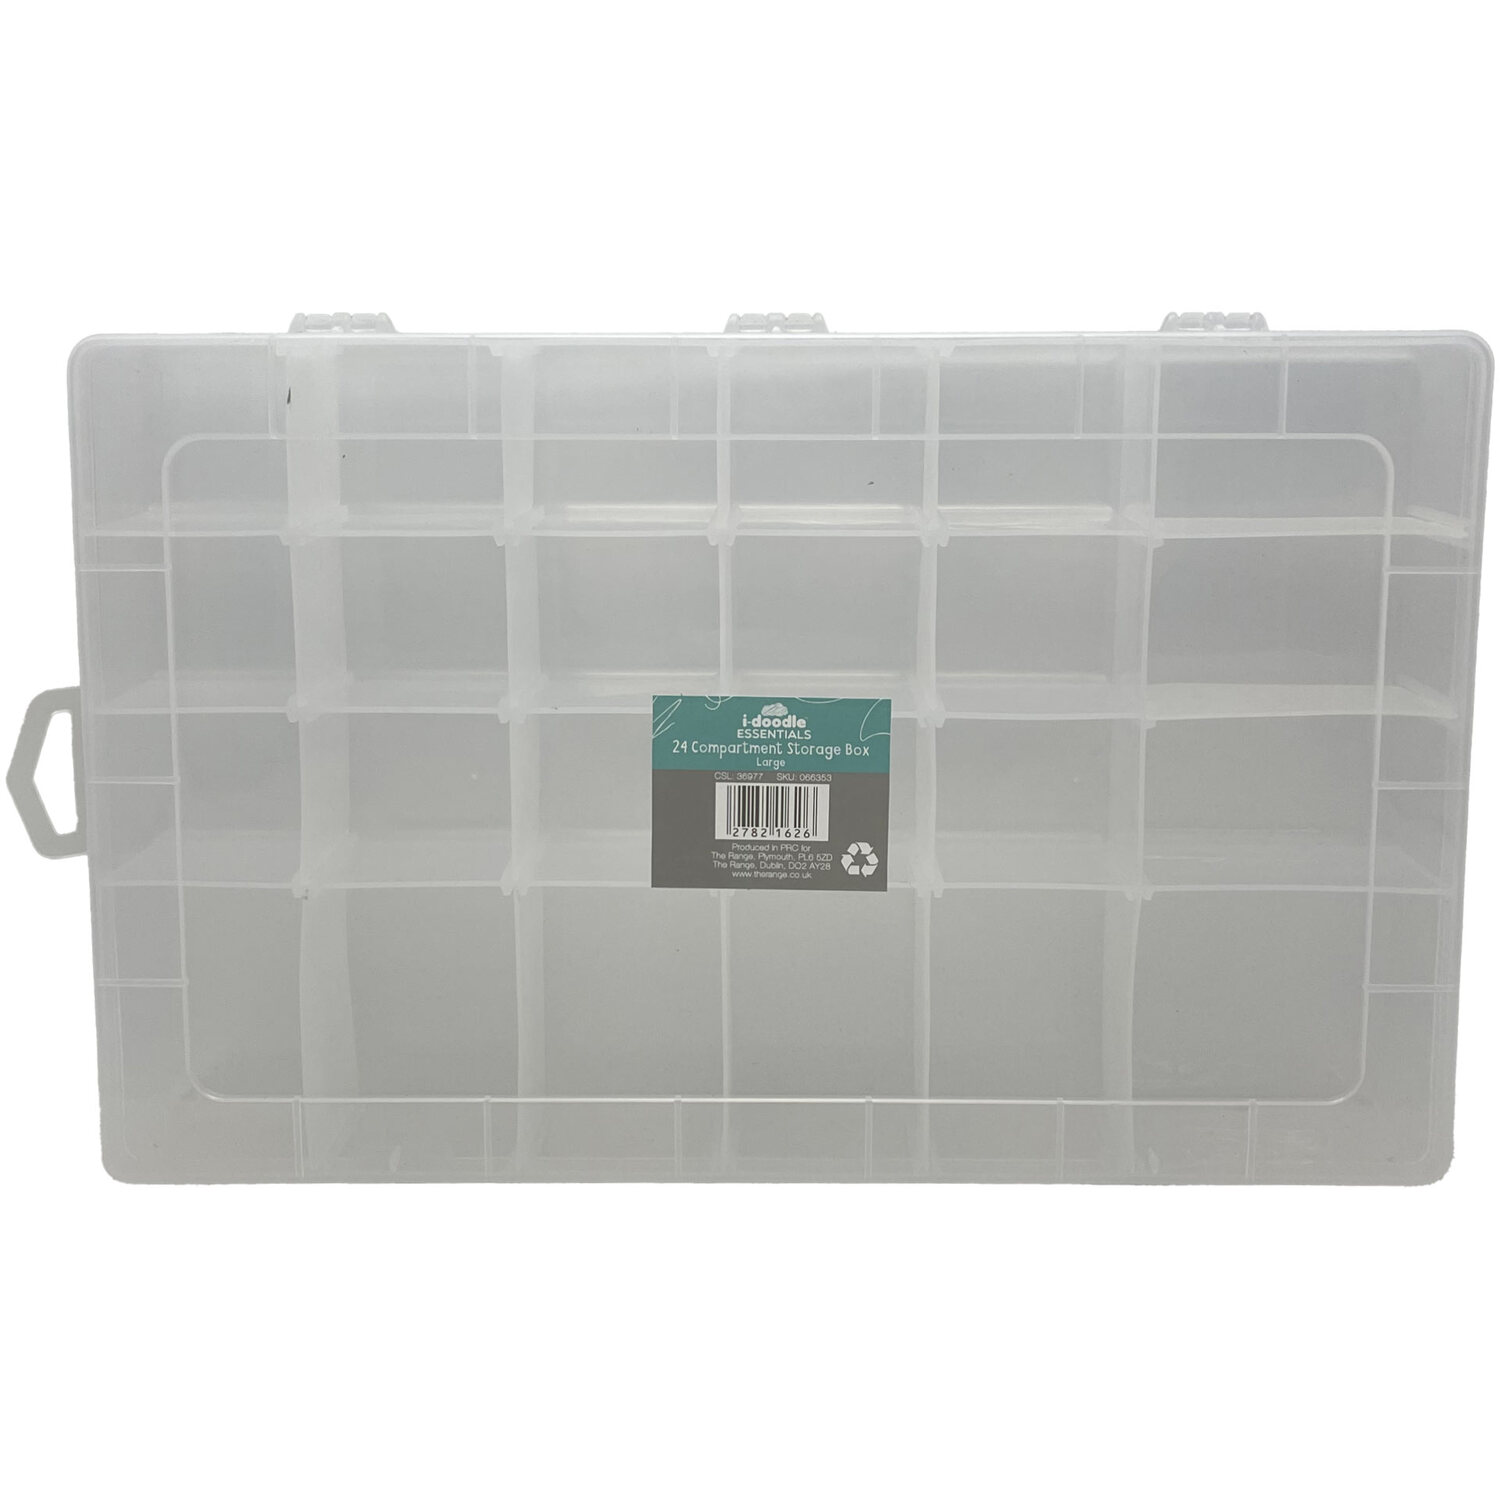 i-doodle 24 Compartment Large Clear Storage Box Image 1